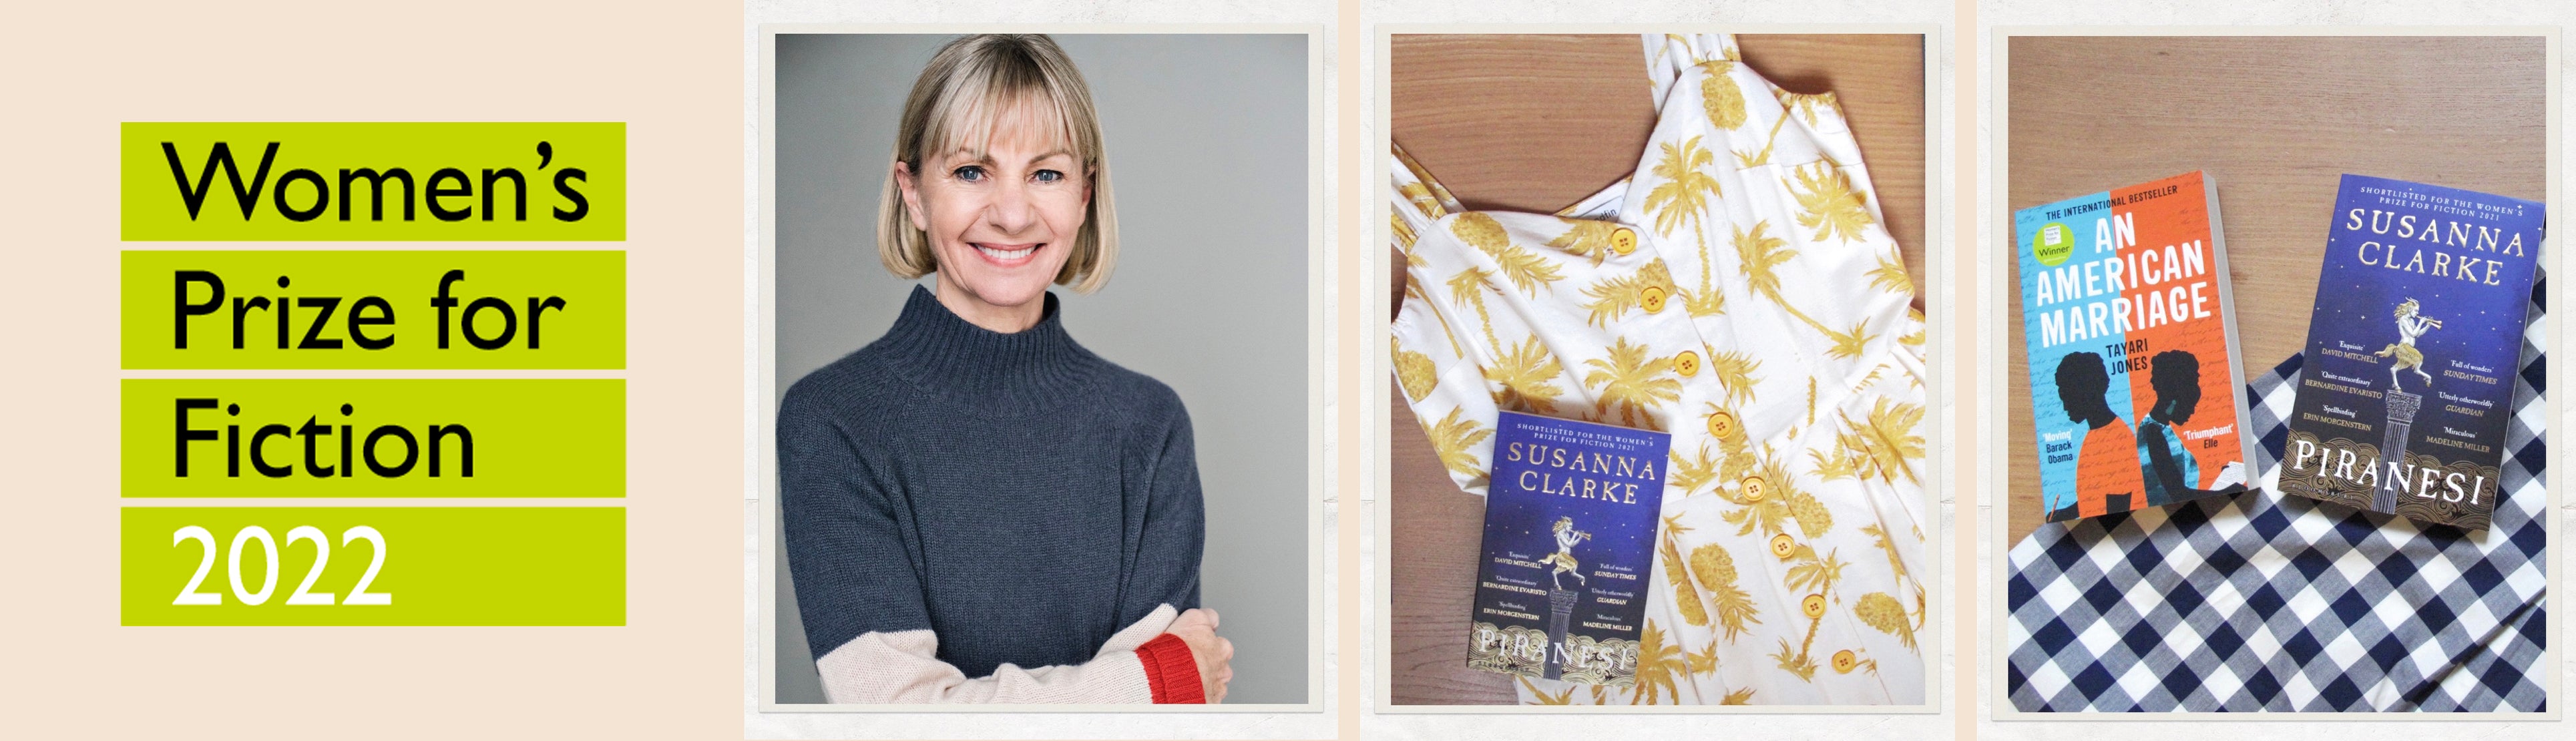 International Women's Day: Celebrating women's voices with author Kate Mosse